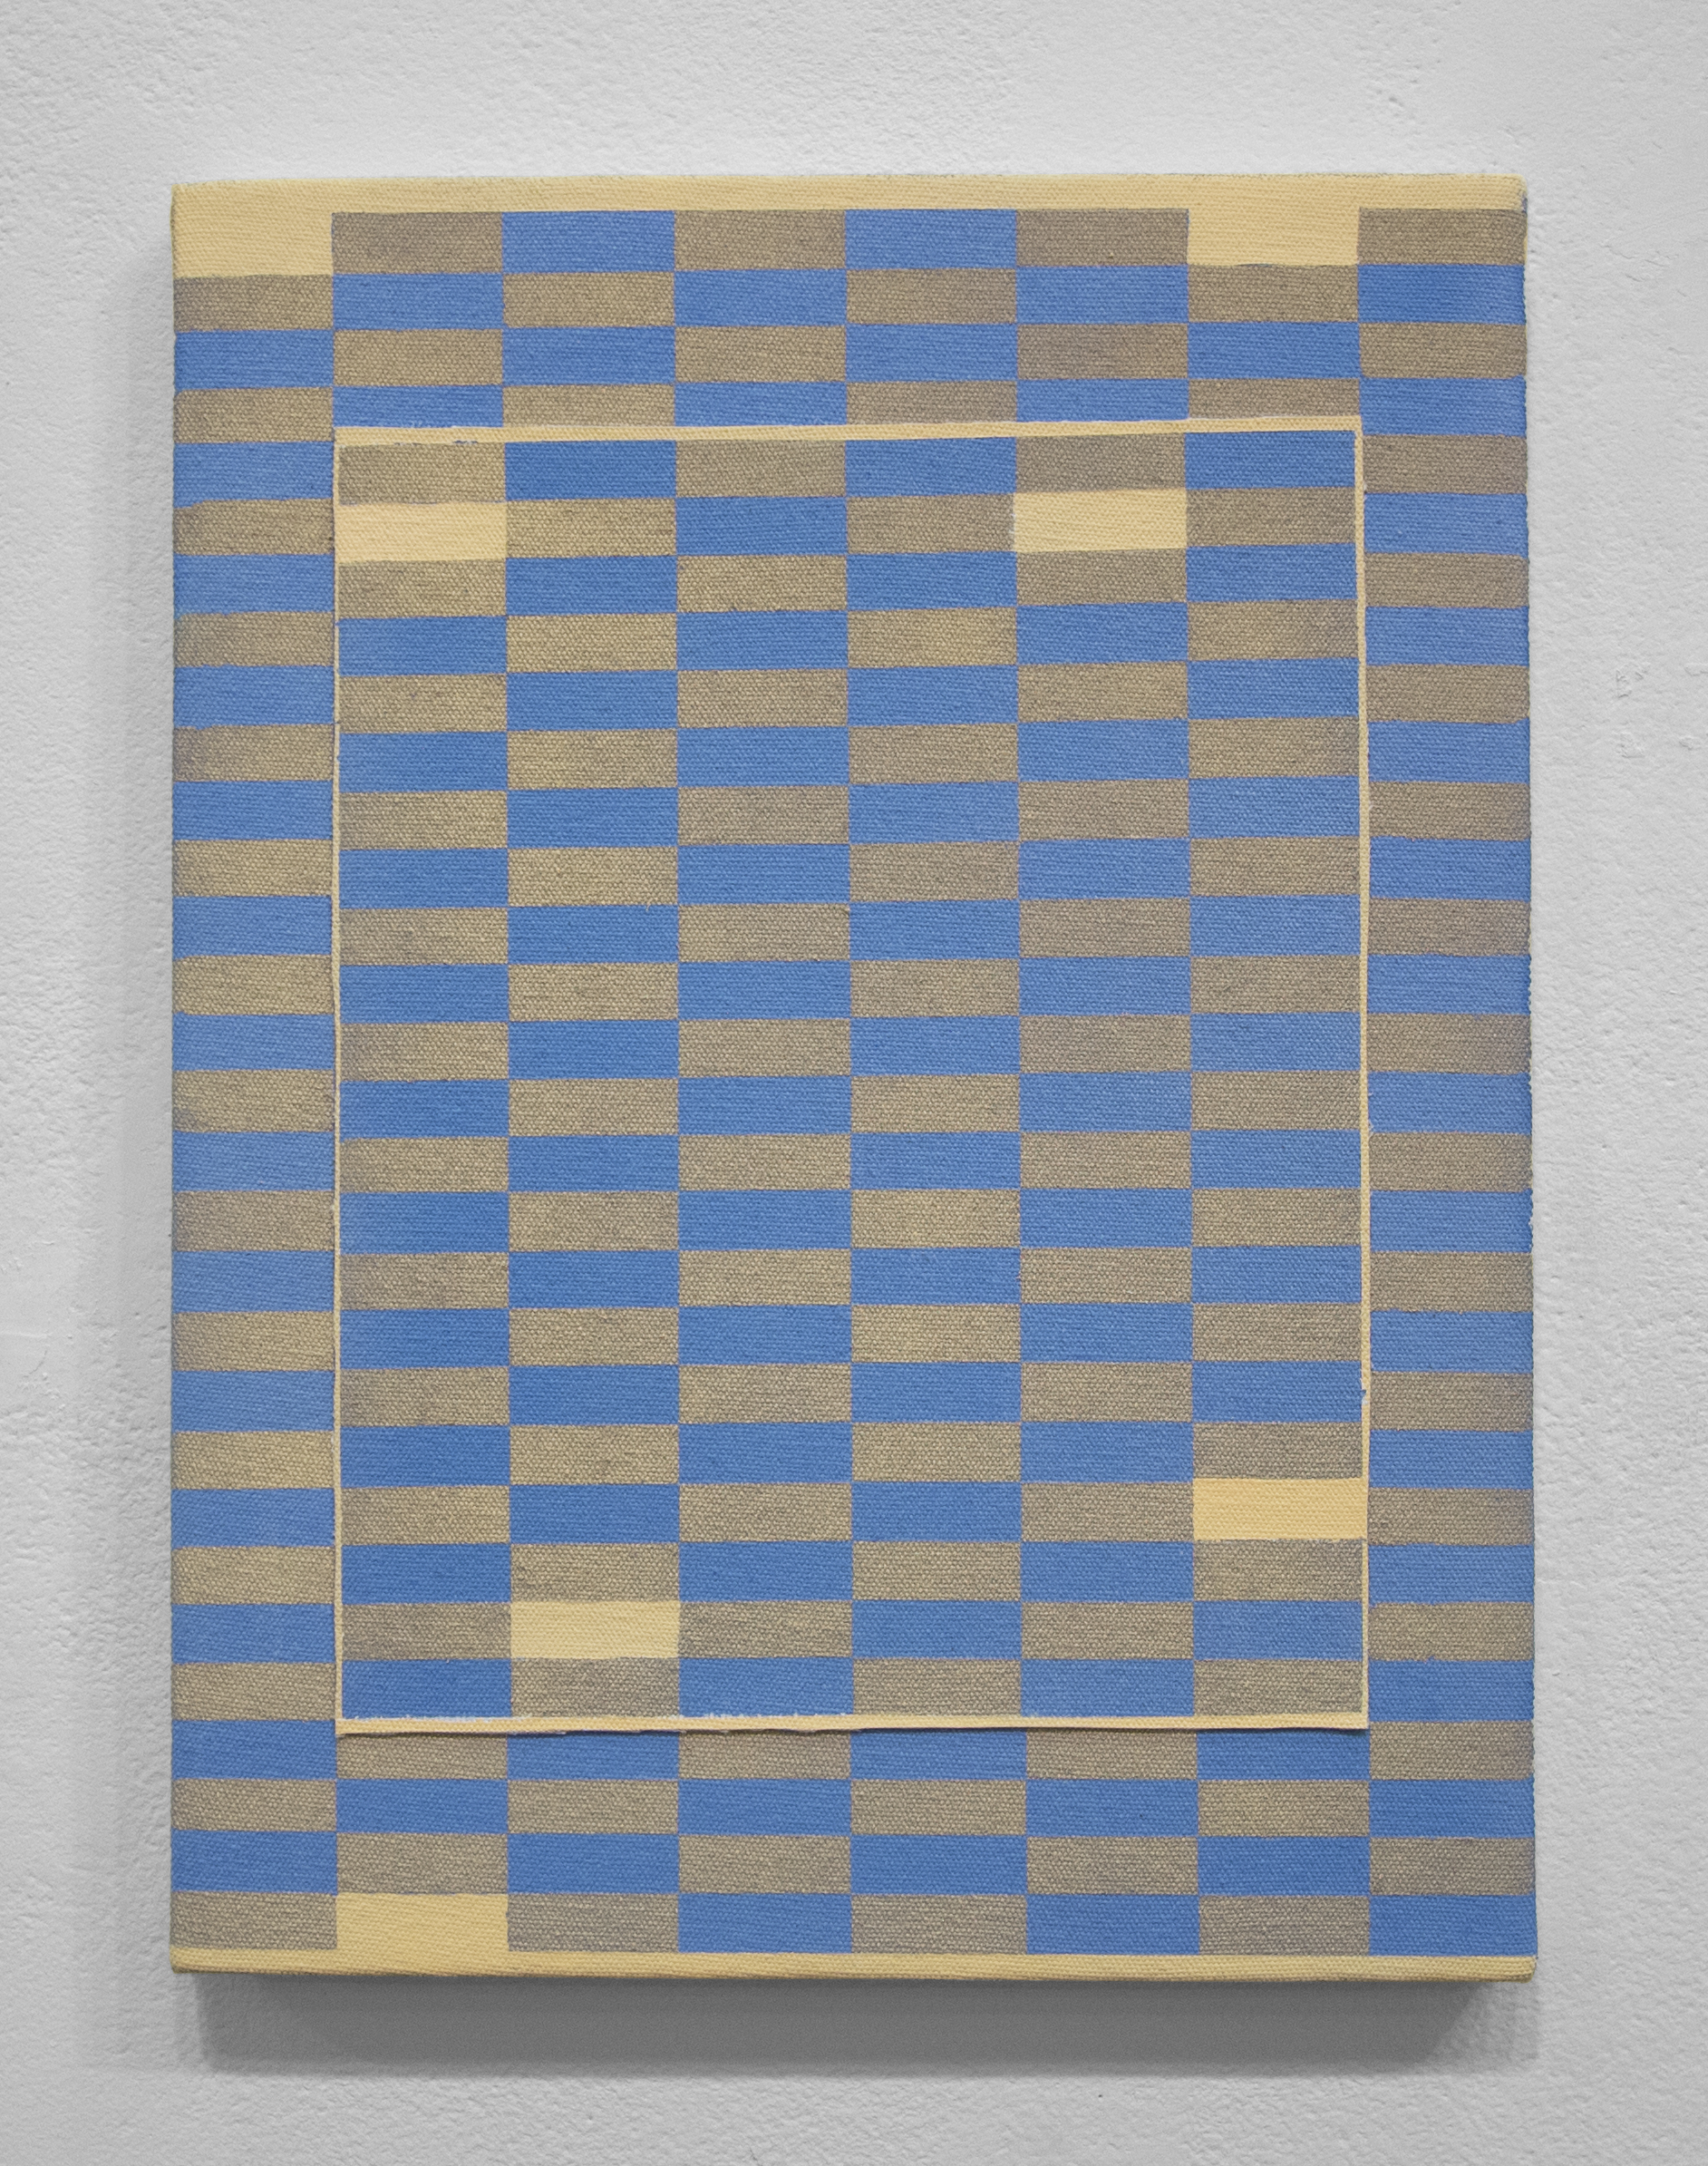 Eric Cagley, Blue Yellow, Acrylic on Canvas, 16 x 12 inches, 2015